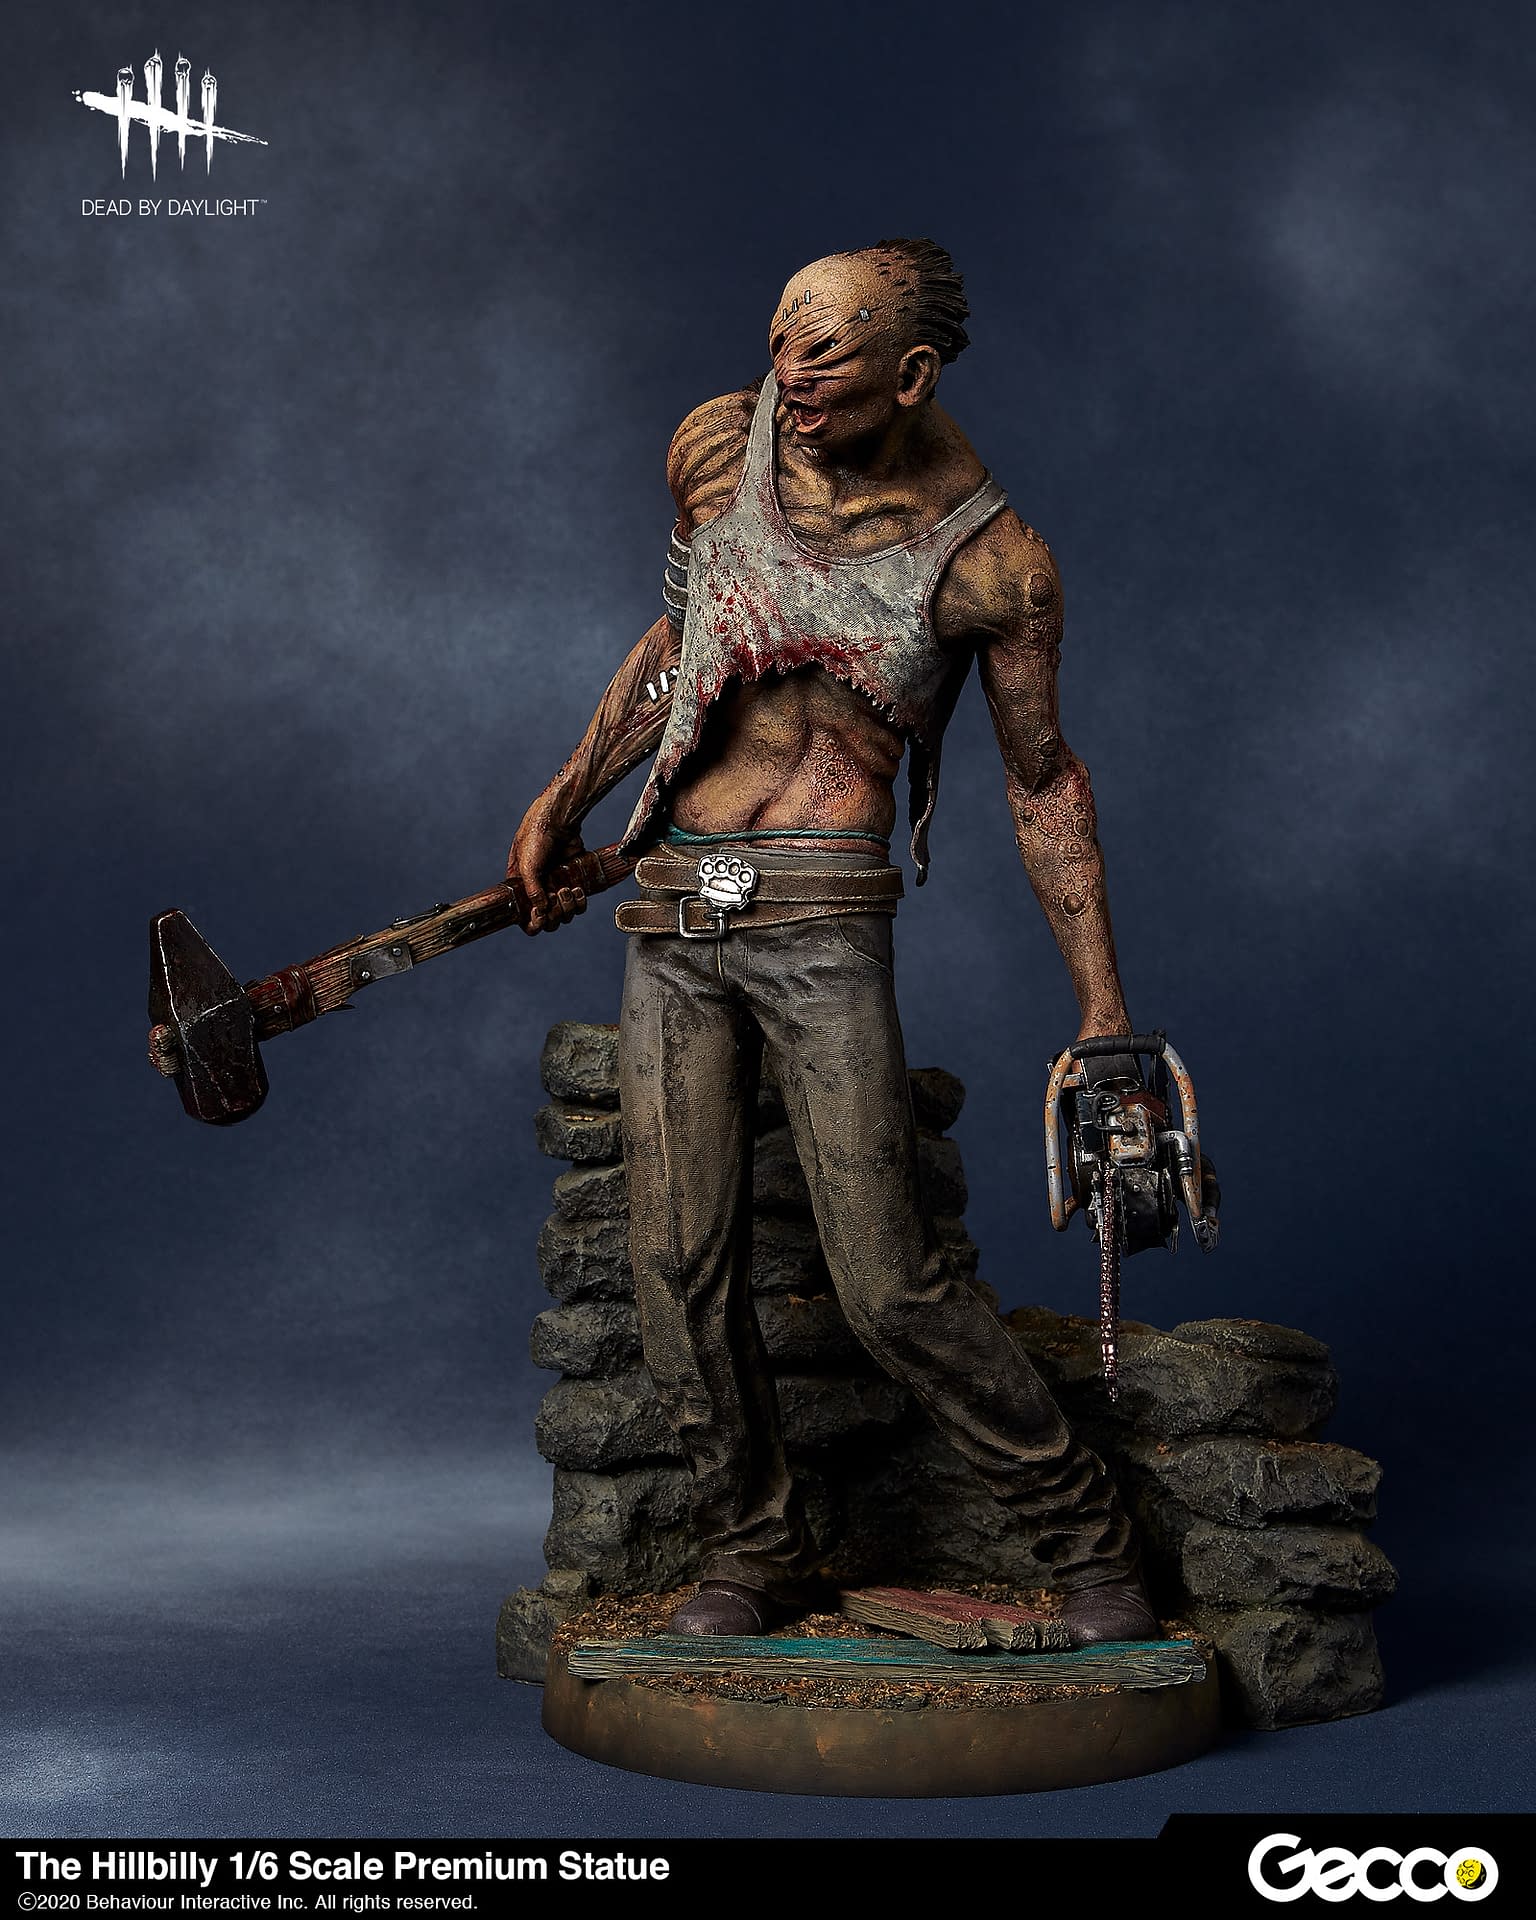 Gecco-Dead-by-Daylight-Hillbilly-Statue-009